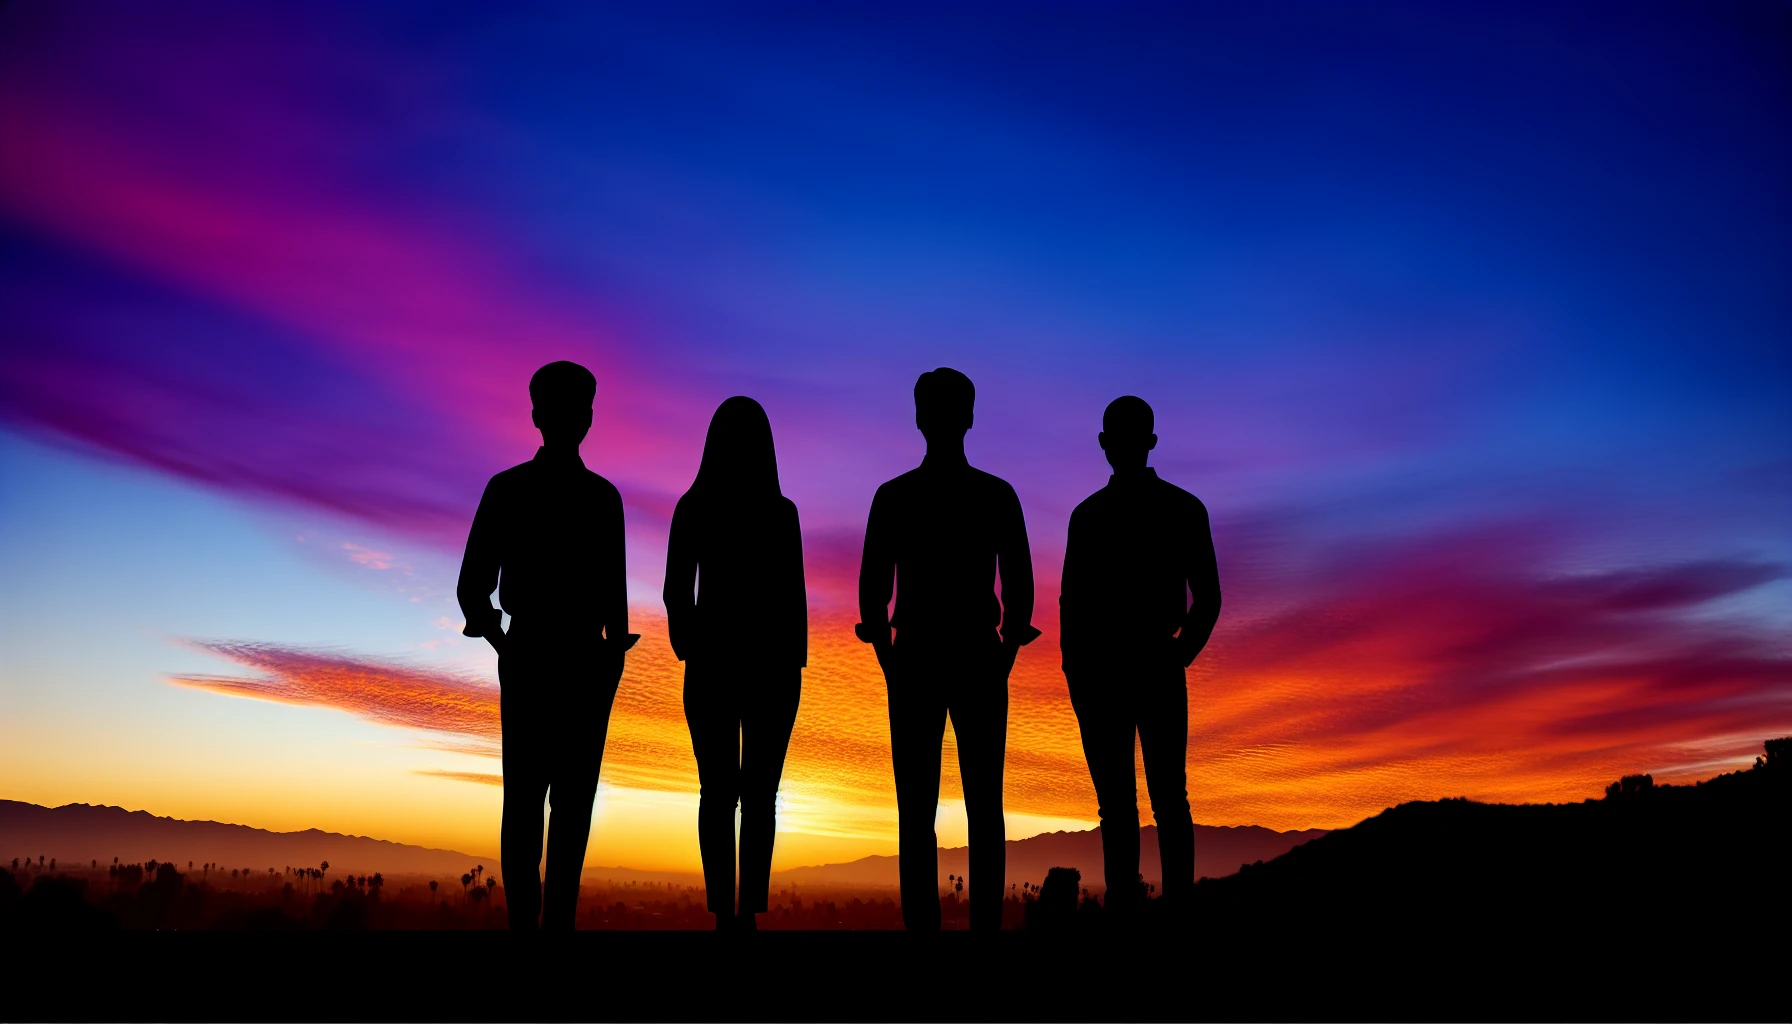 Silhouettes of employees with the sunset in the background